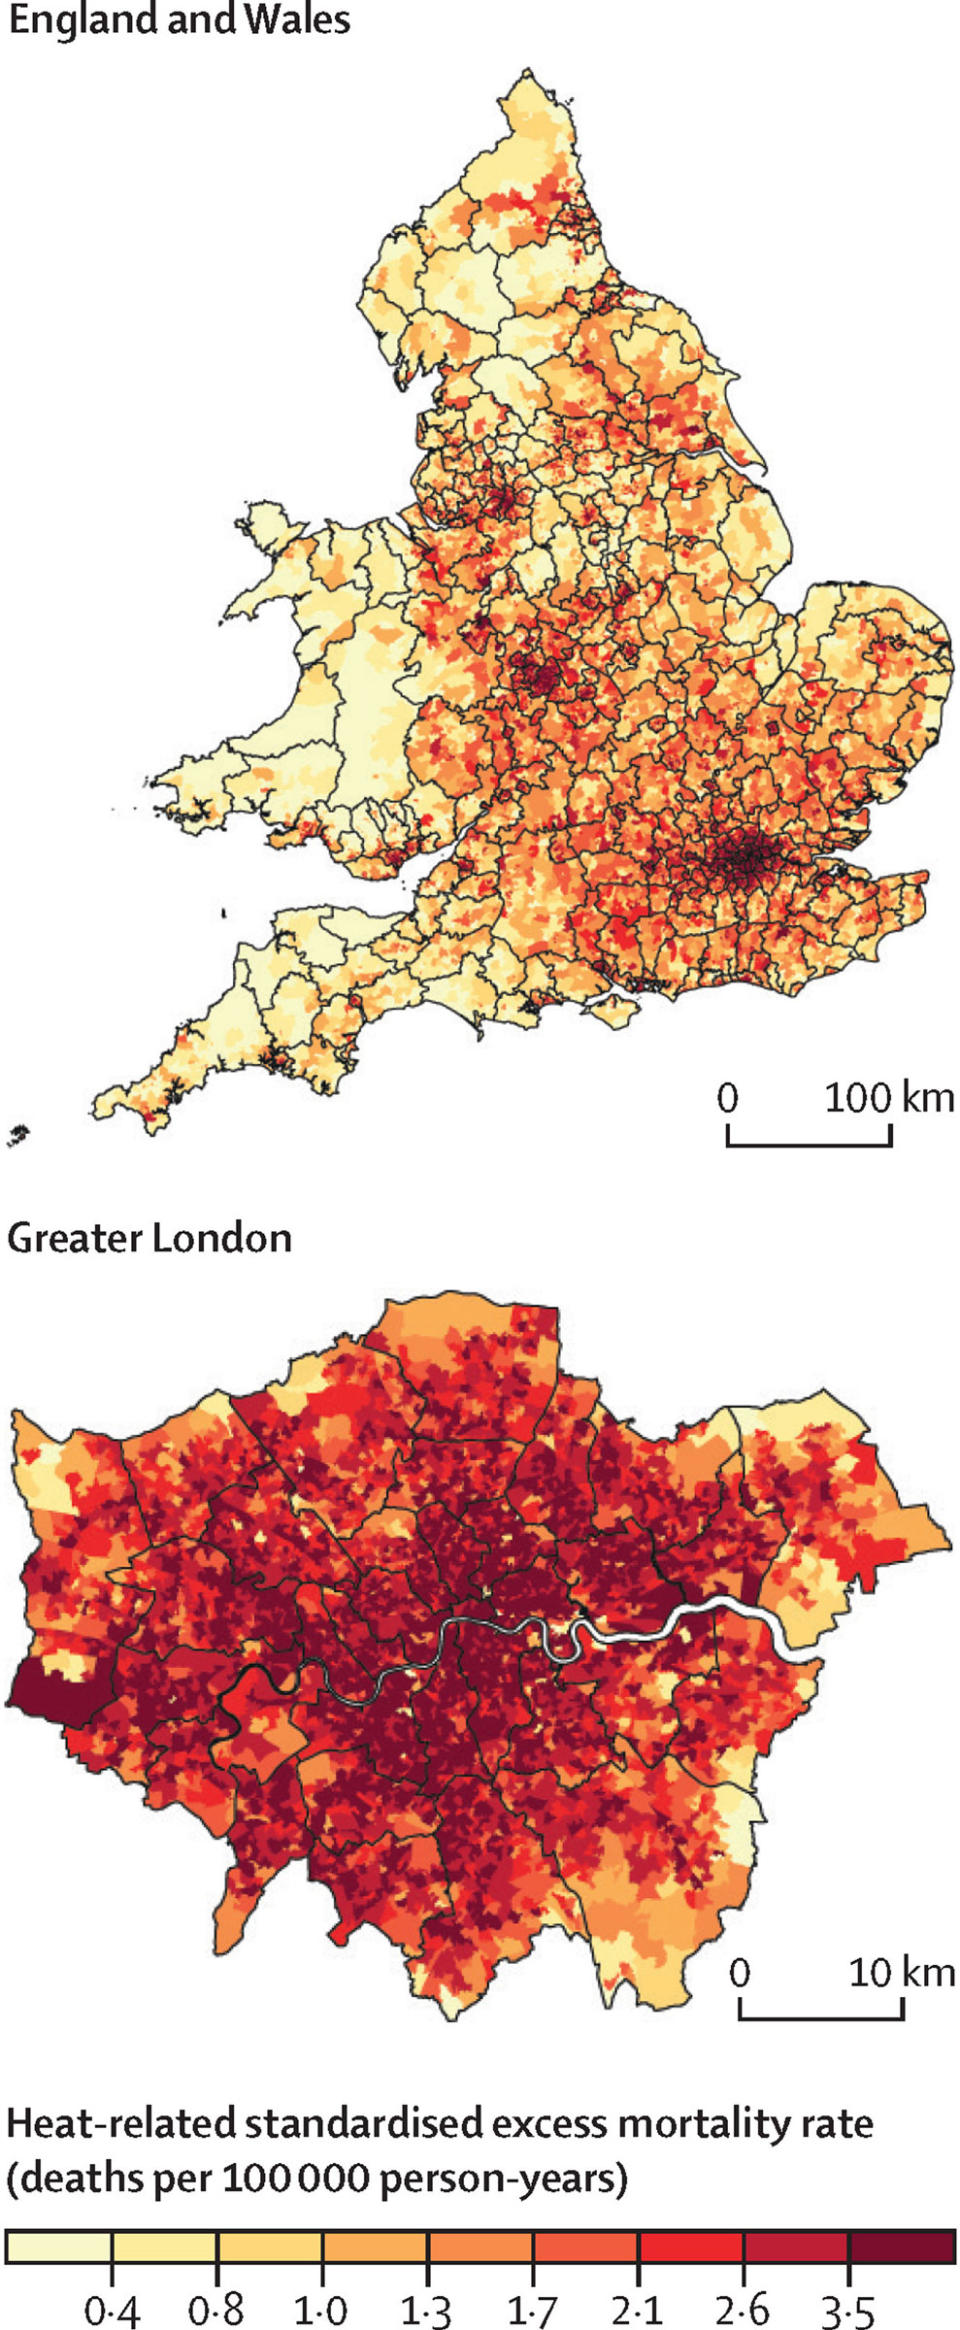 Highly localized maps of England and Wales (top) and London (bottom) showing which communities are most vulnerable to heat-related fatalities.<span class="copyright">Gasparrini et al. / The Lancet Planetary Health</span>